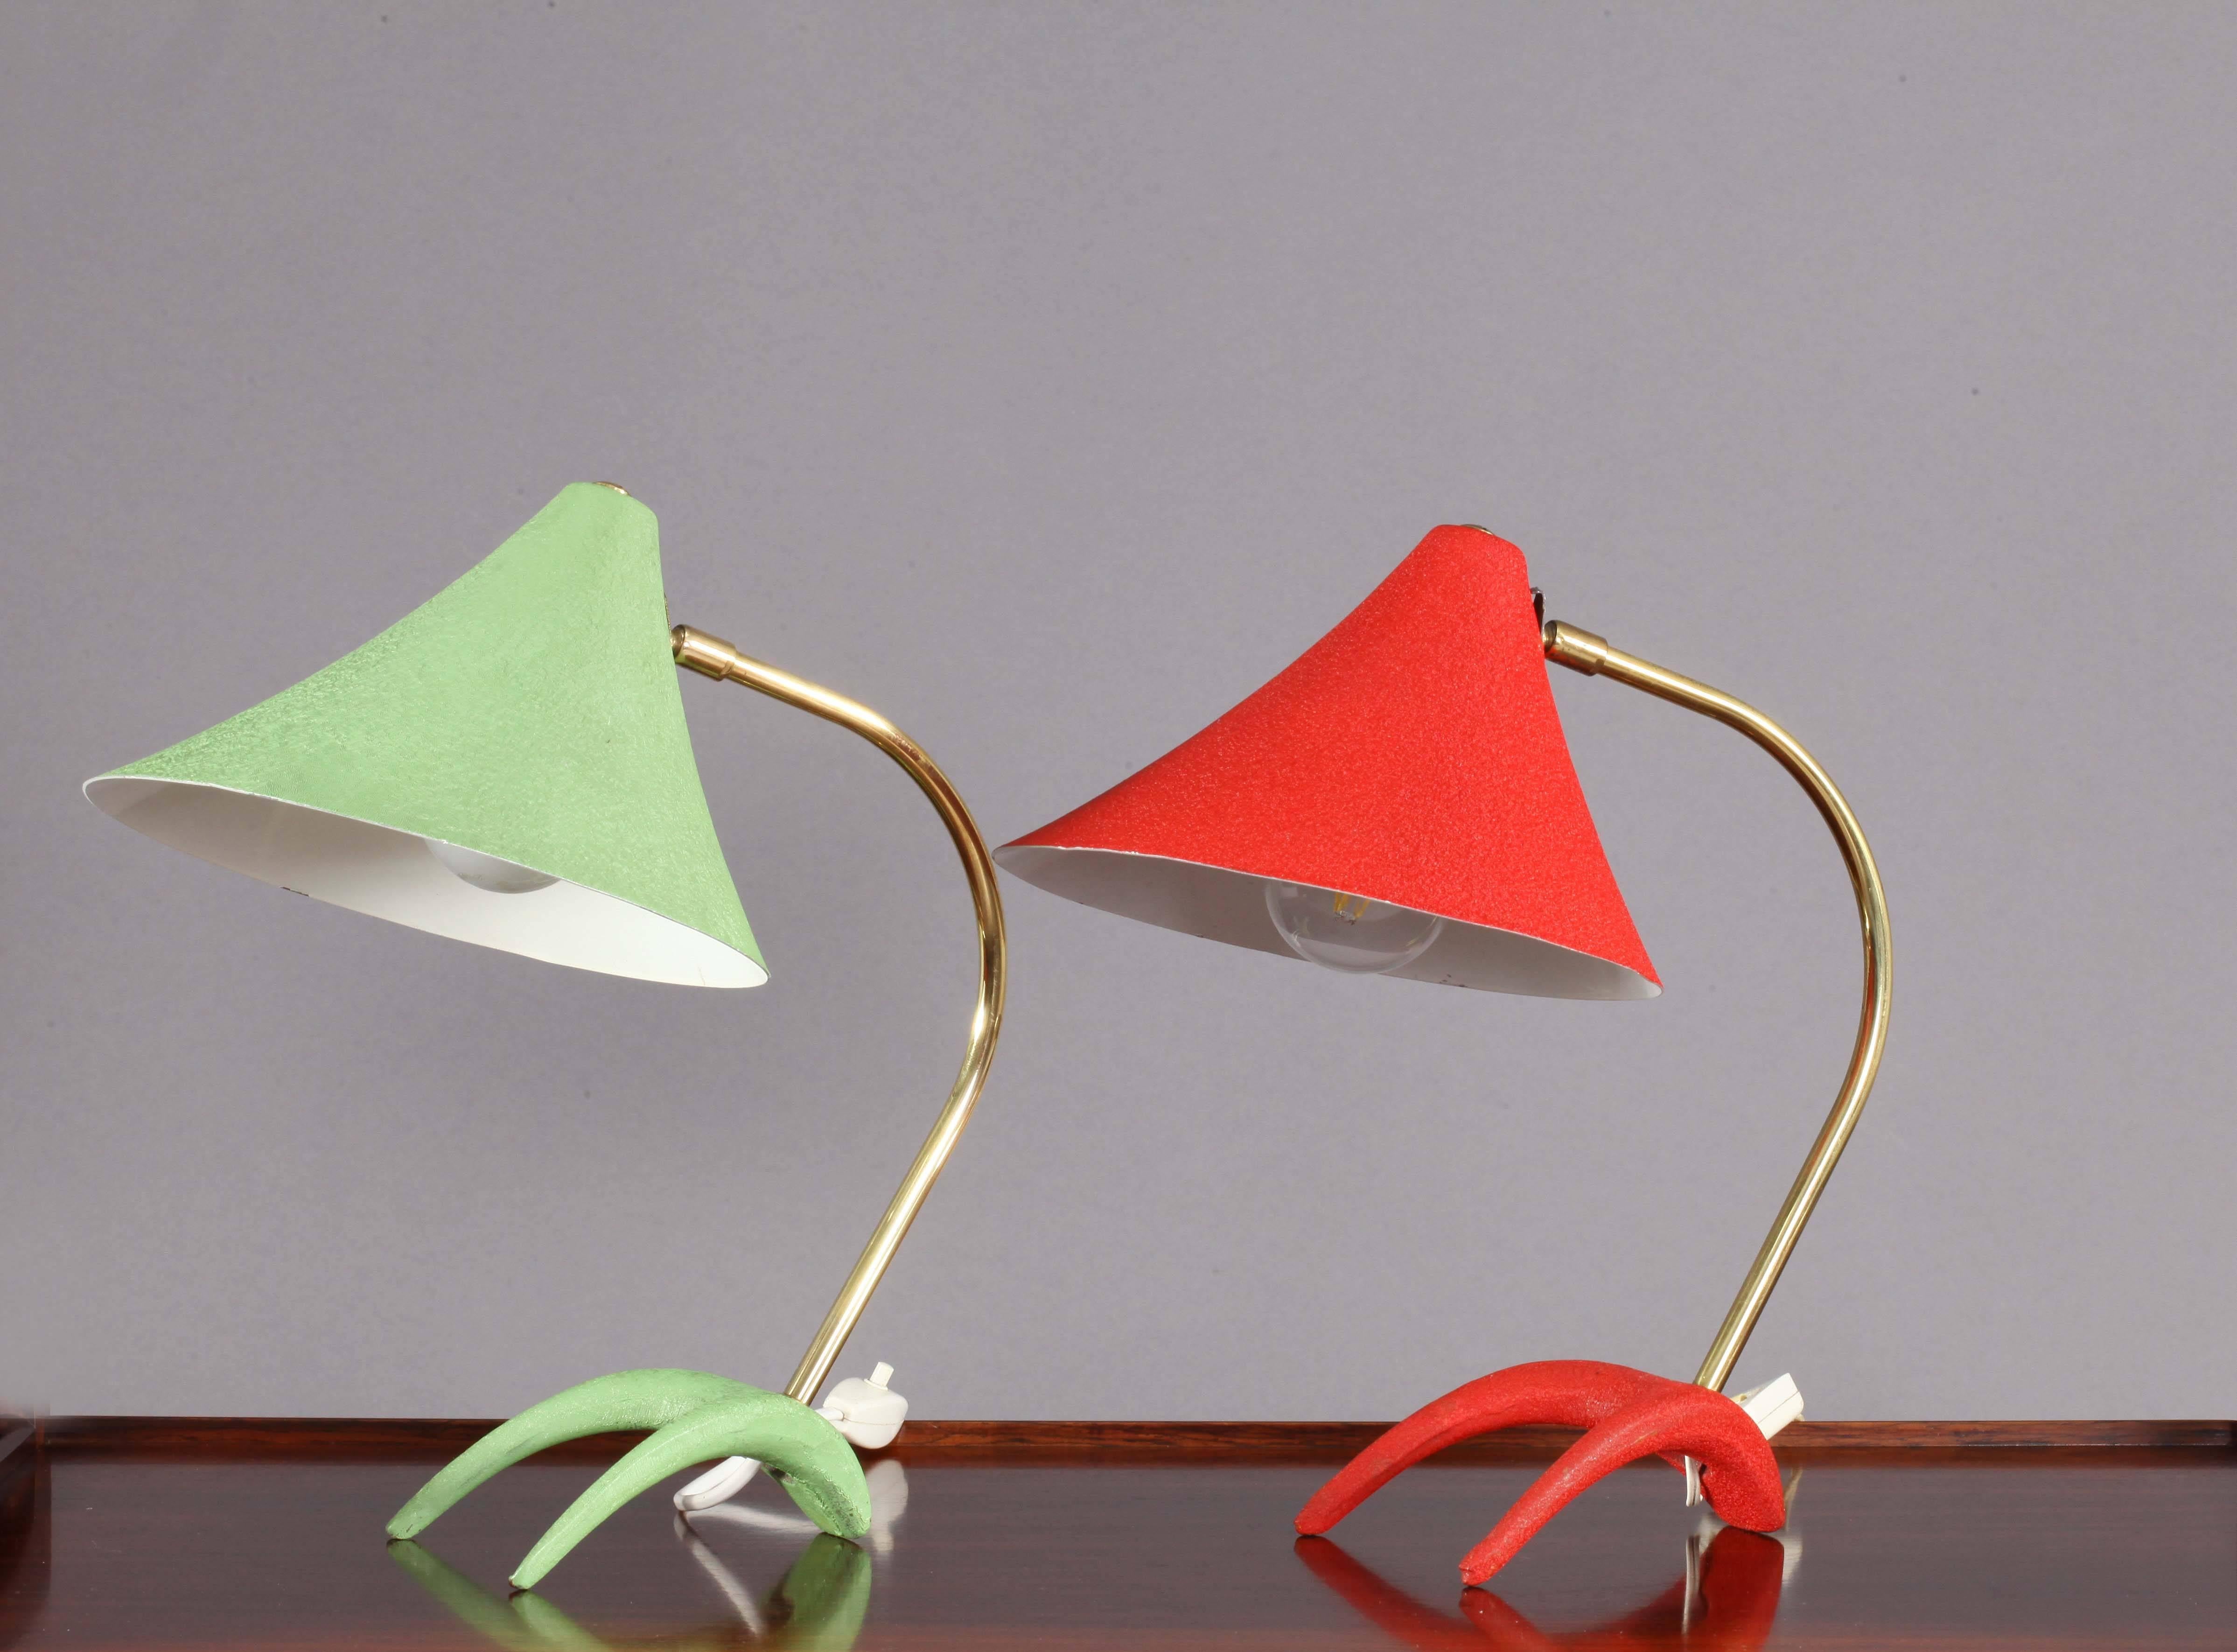 Pair of table lamp,
Design Louis Kalff,
Netherland, 1950.
Red and green lacquered iron base, movable red shade, chrome stam.
Measures: Height 14inch (34cm).